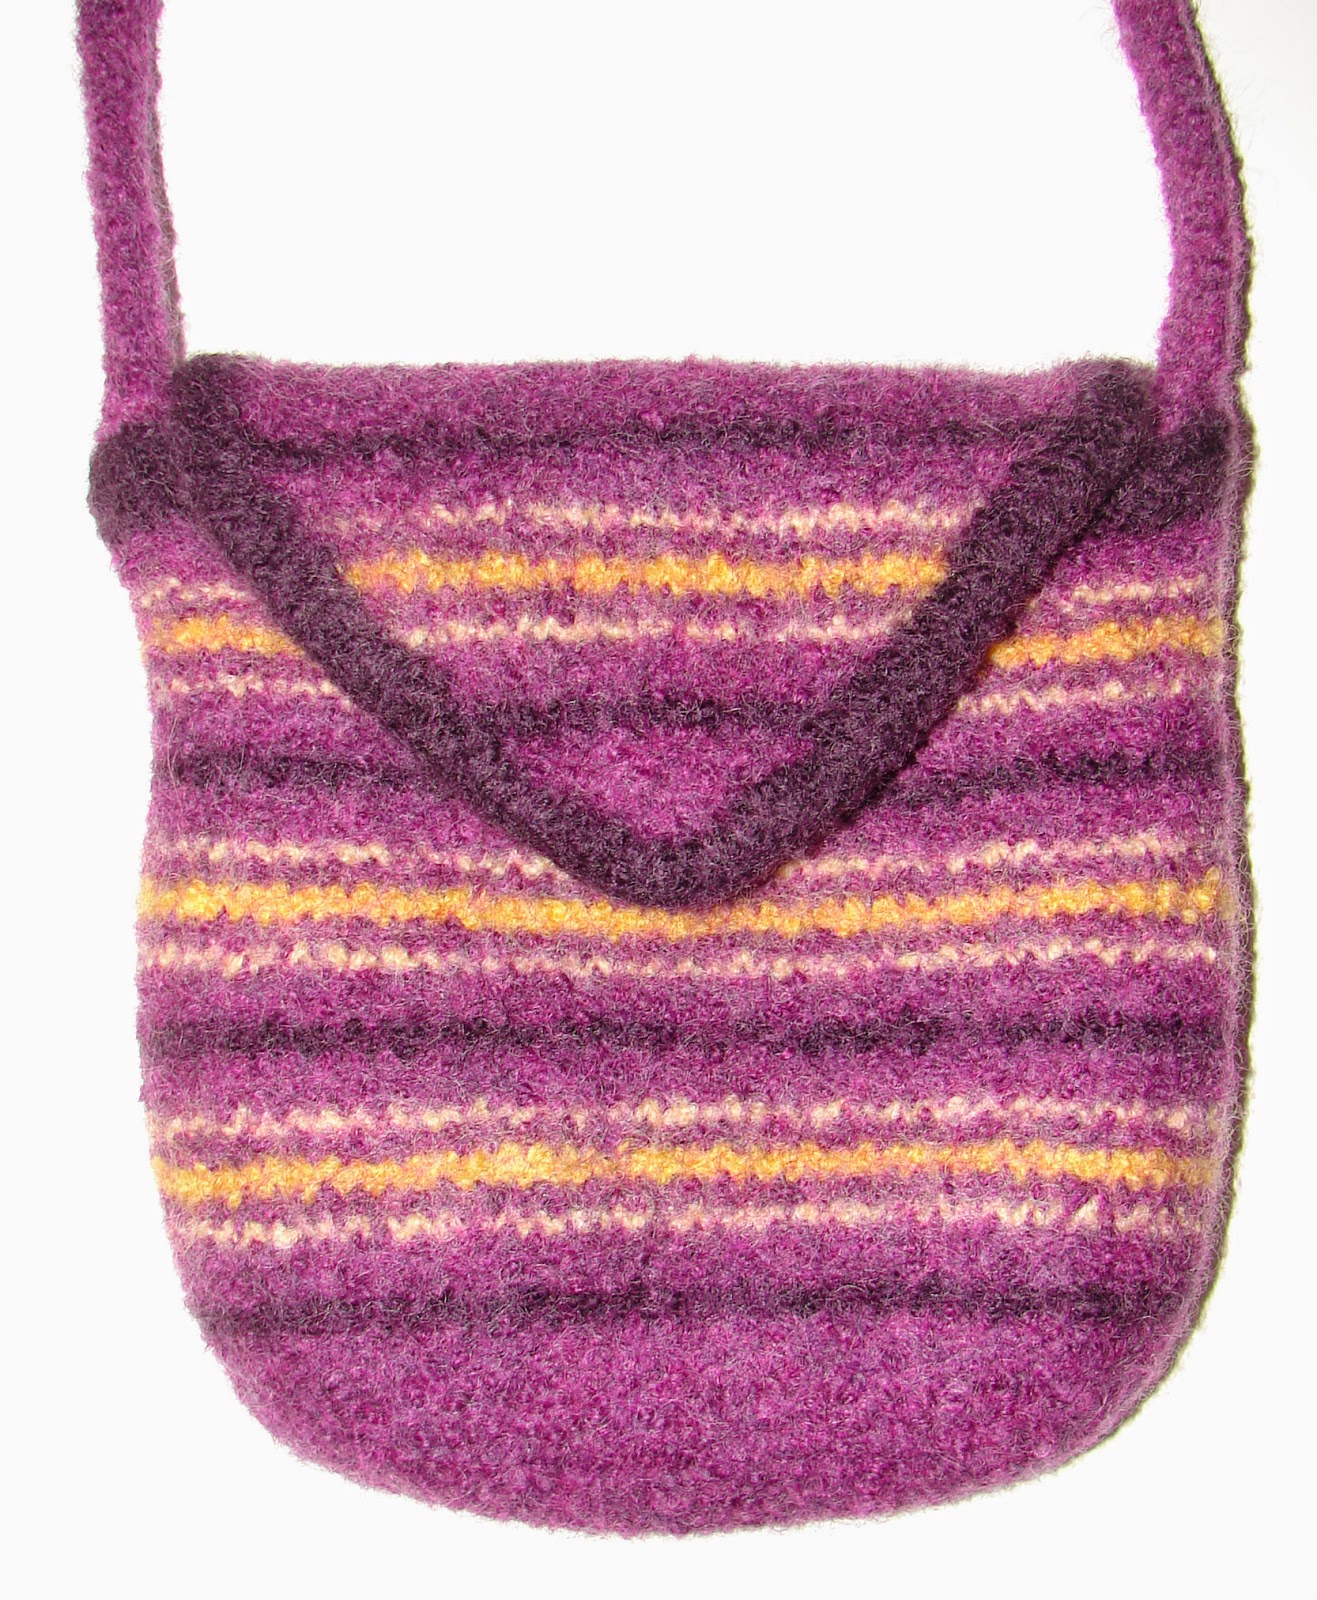 purse, bag, knitted, knit, felted, felt, striped, purple, yellow